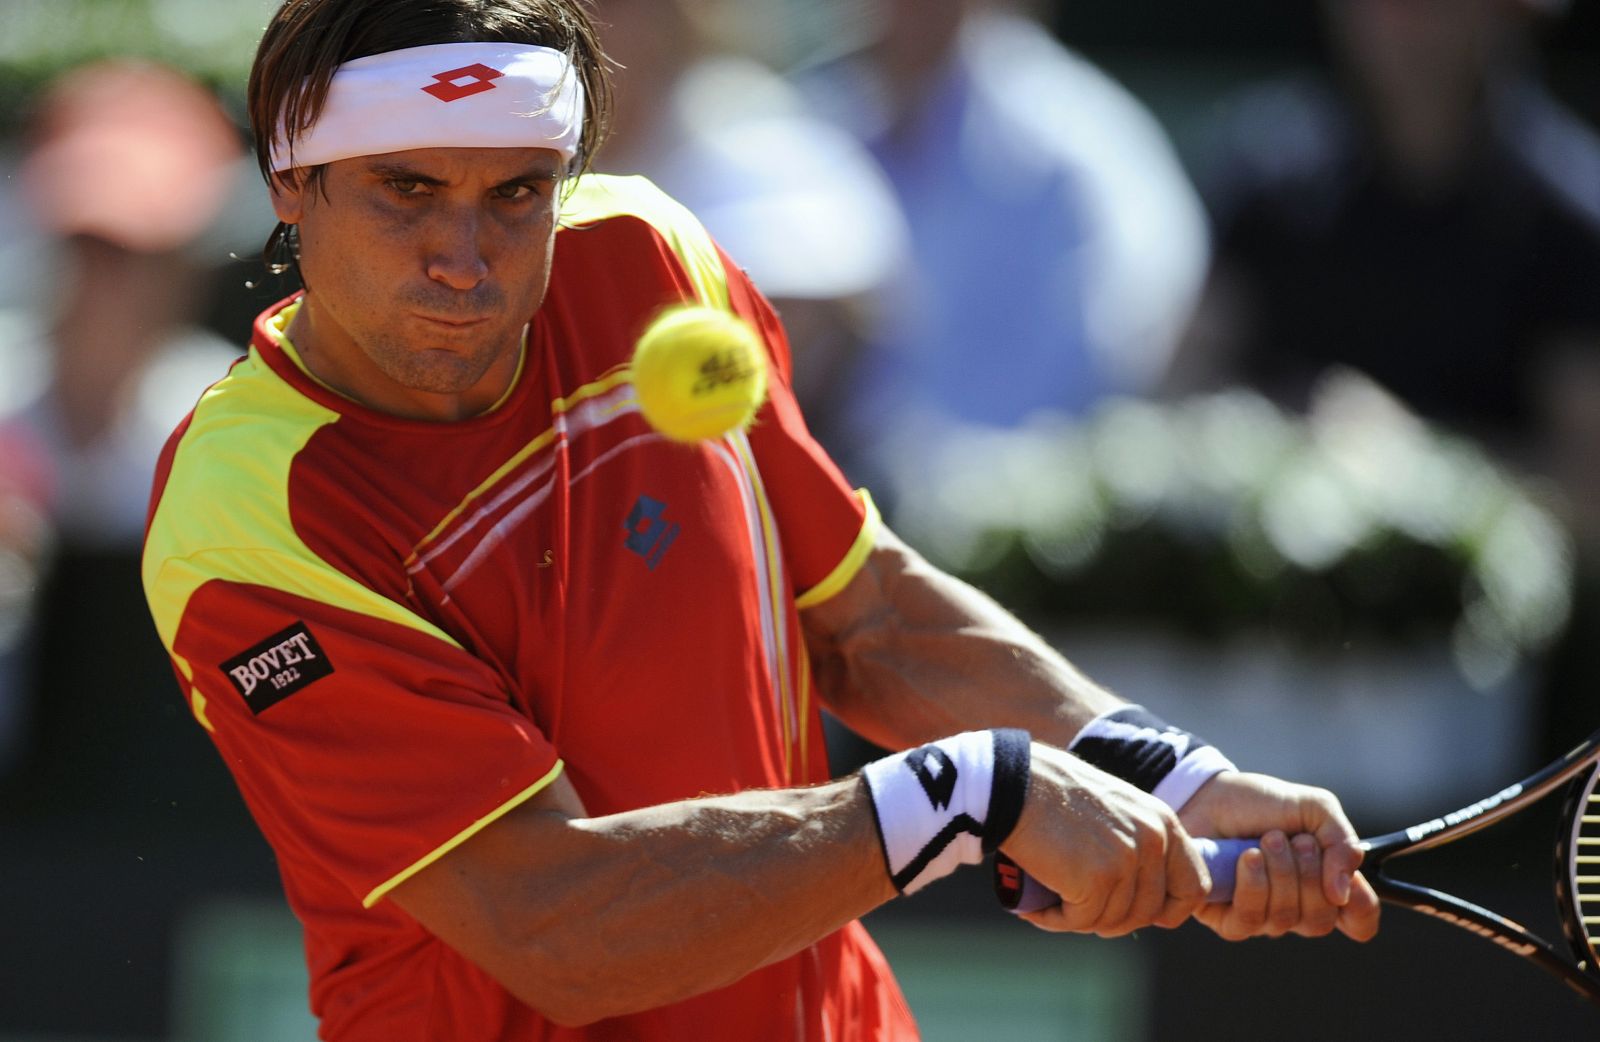 Ferrer of Spain returns a shot to Querrey of the U.S. during their Davis Cup World Group semi-final match in Gijon